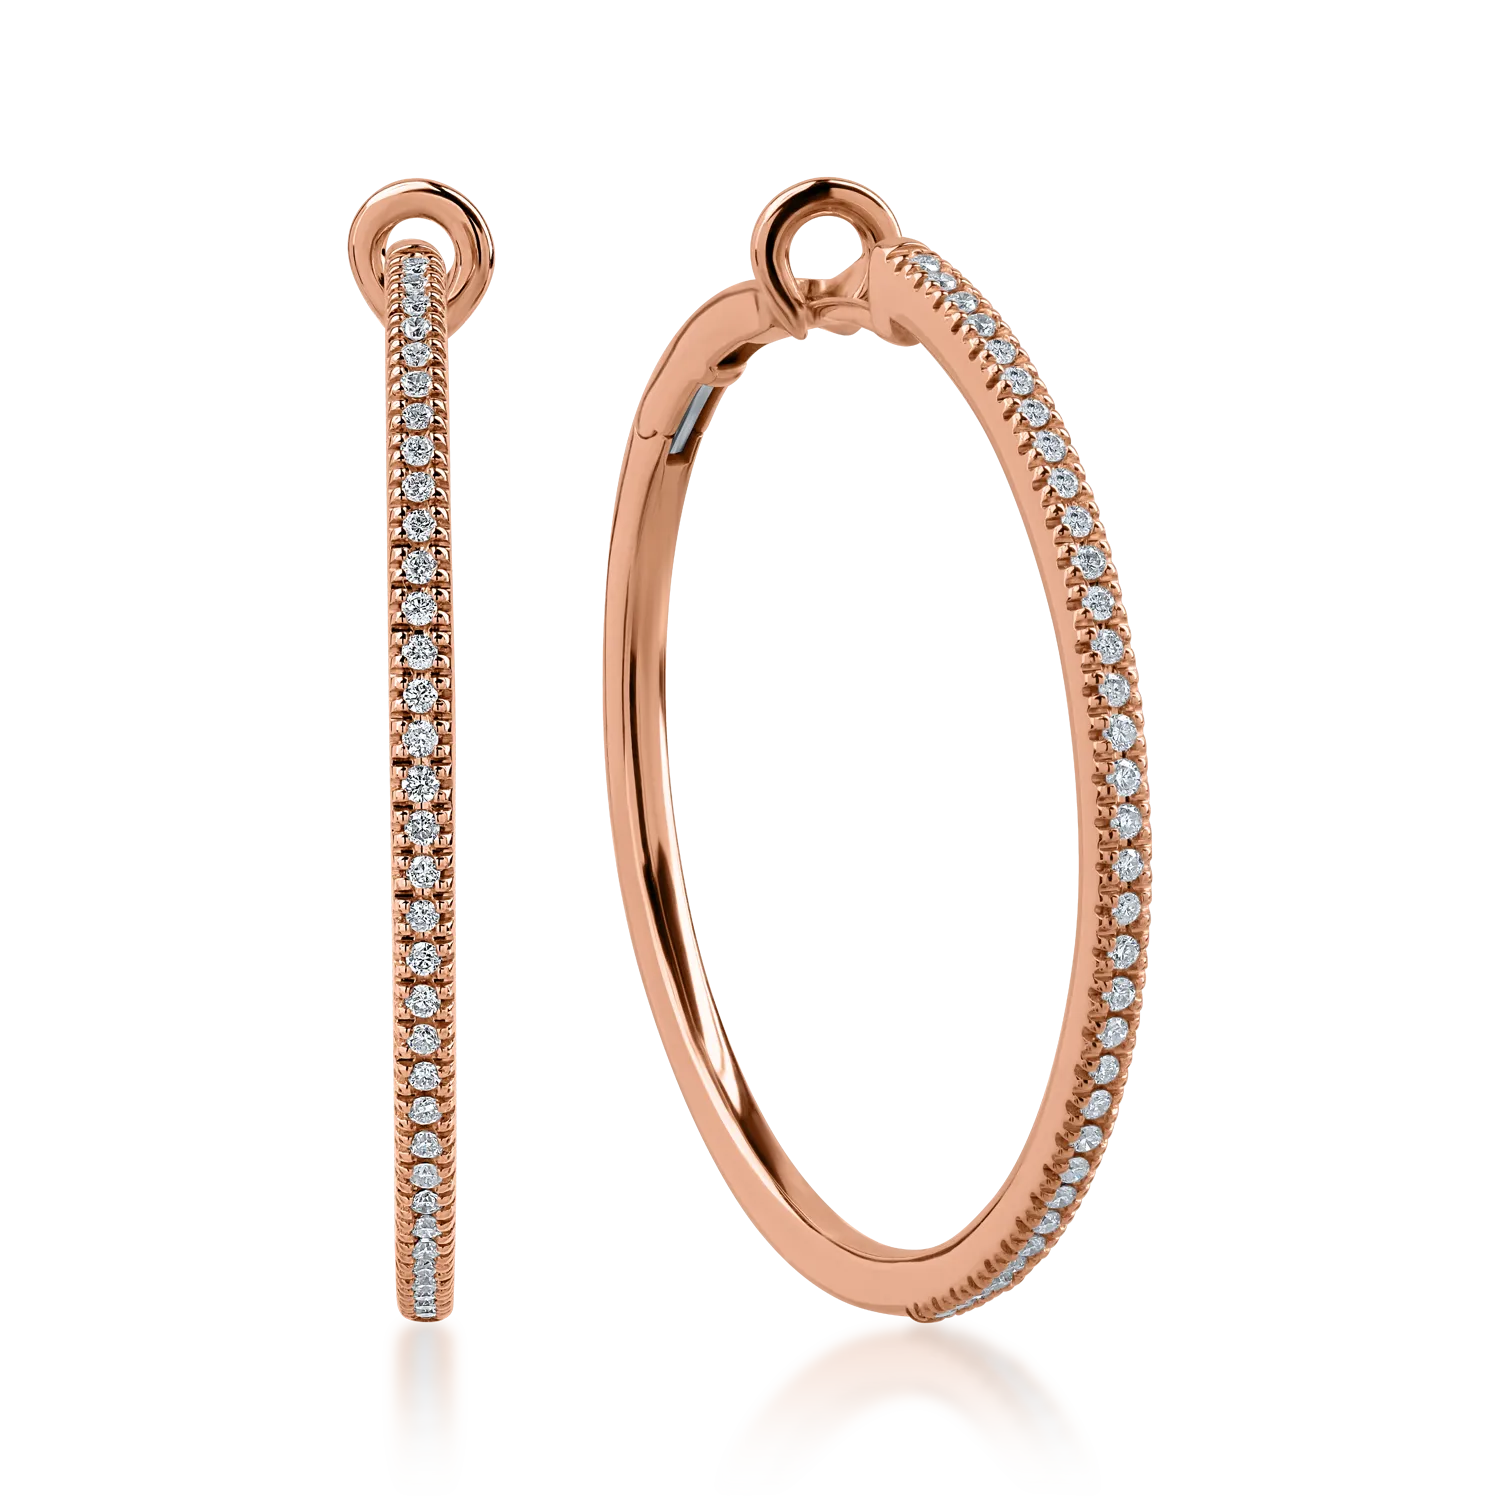 Rose gold earrings with 0.5ct diamonds